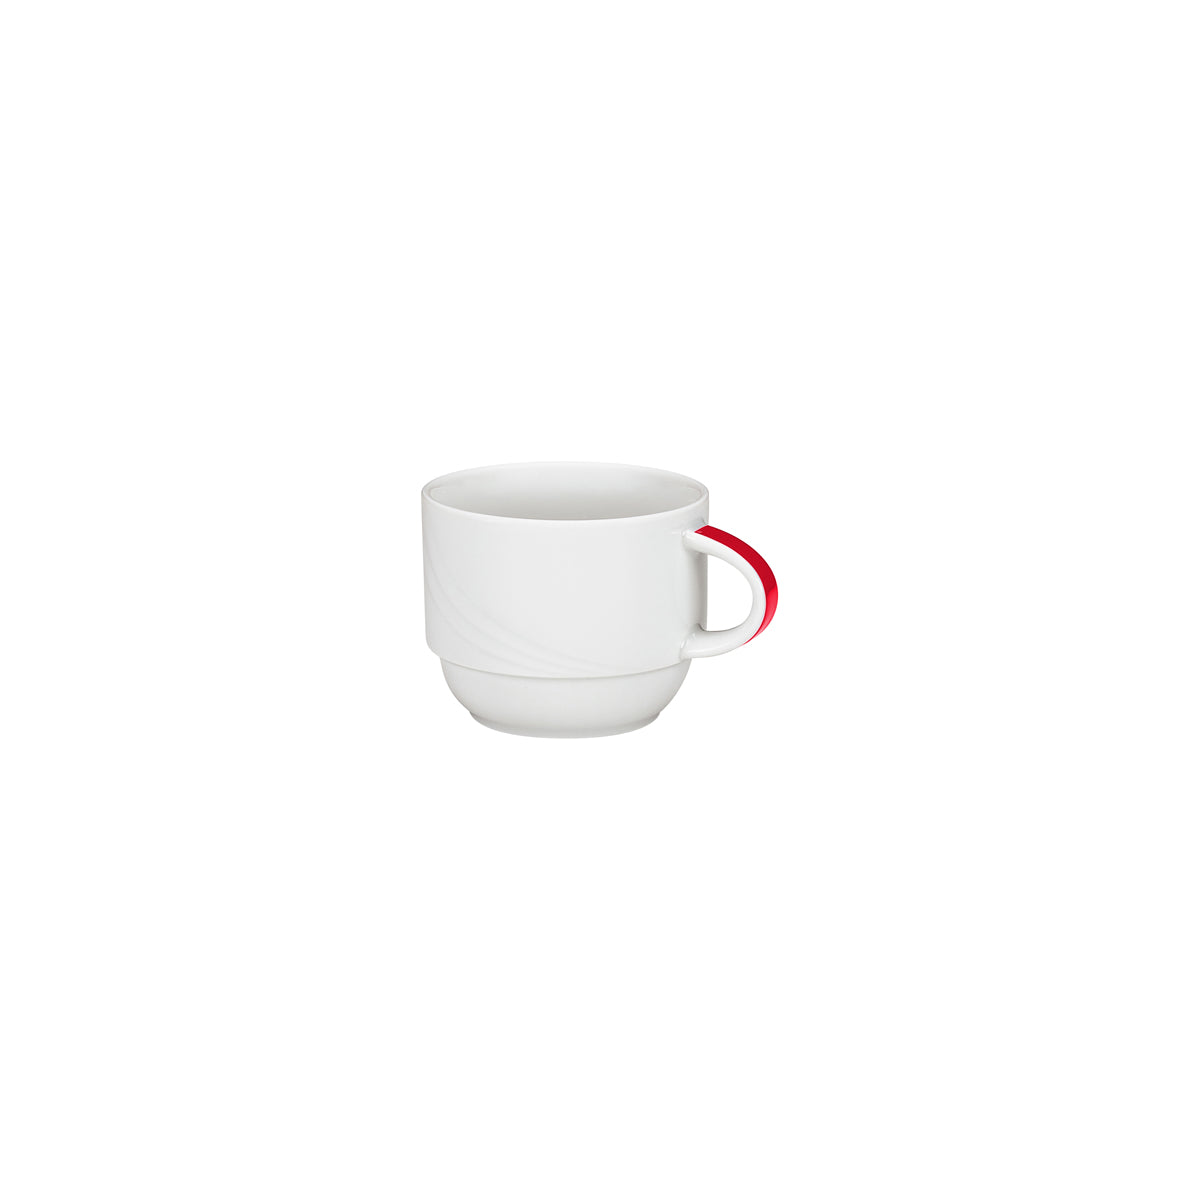 SH9185119/62931 Donna Senior Decor Stackable Cup with Red Band 180ml Tomkin Australia Hospitality Supplies